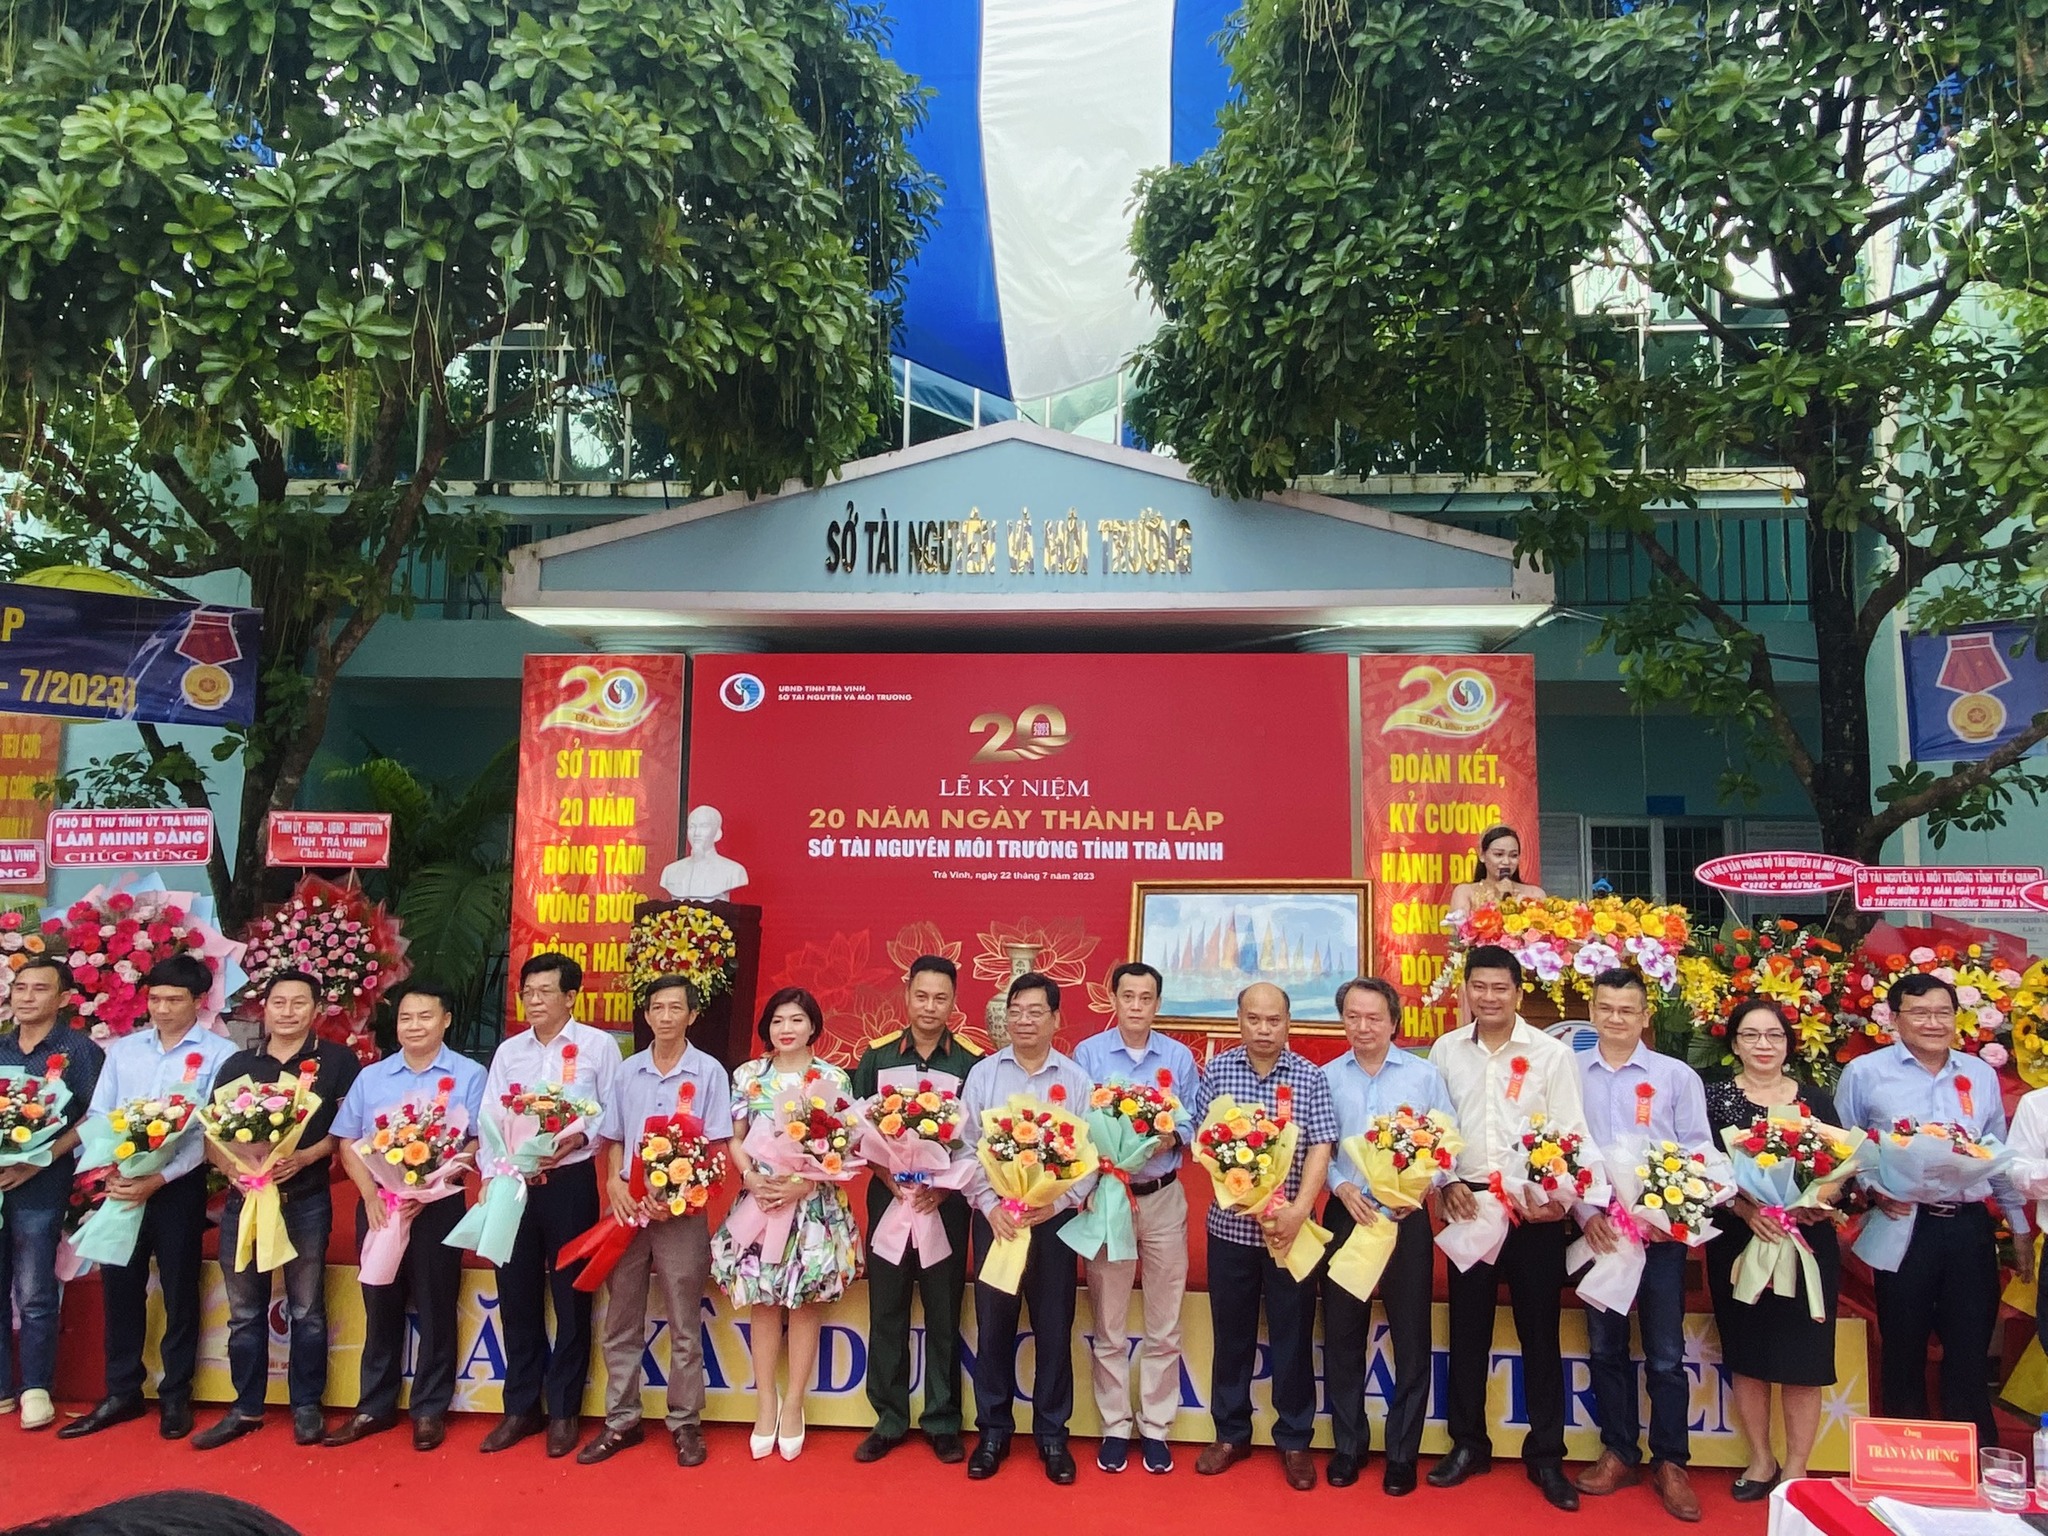 Viet An Group participated in the program to celebrate the 20th anniversary of the establishment of Tra Vinh Department of Natural Resources and Environment